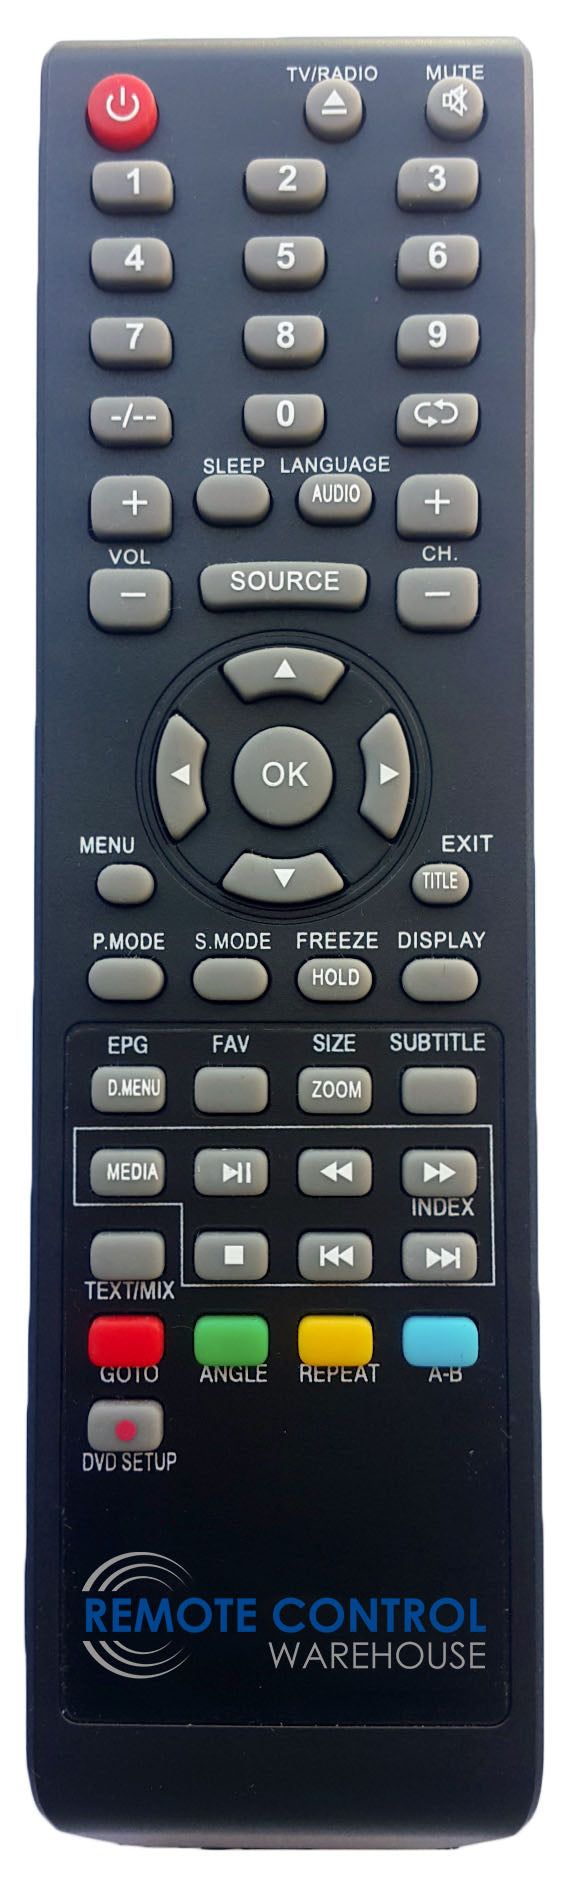 VEON REMOTE CONTROL SUITS -  V55UHDS  4K ULTRA HD LED/LCD  TV